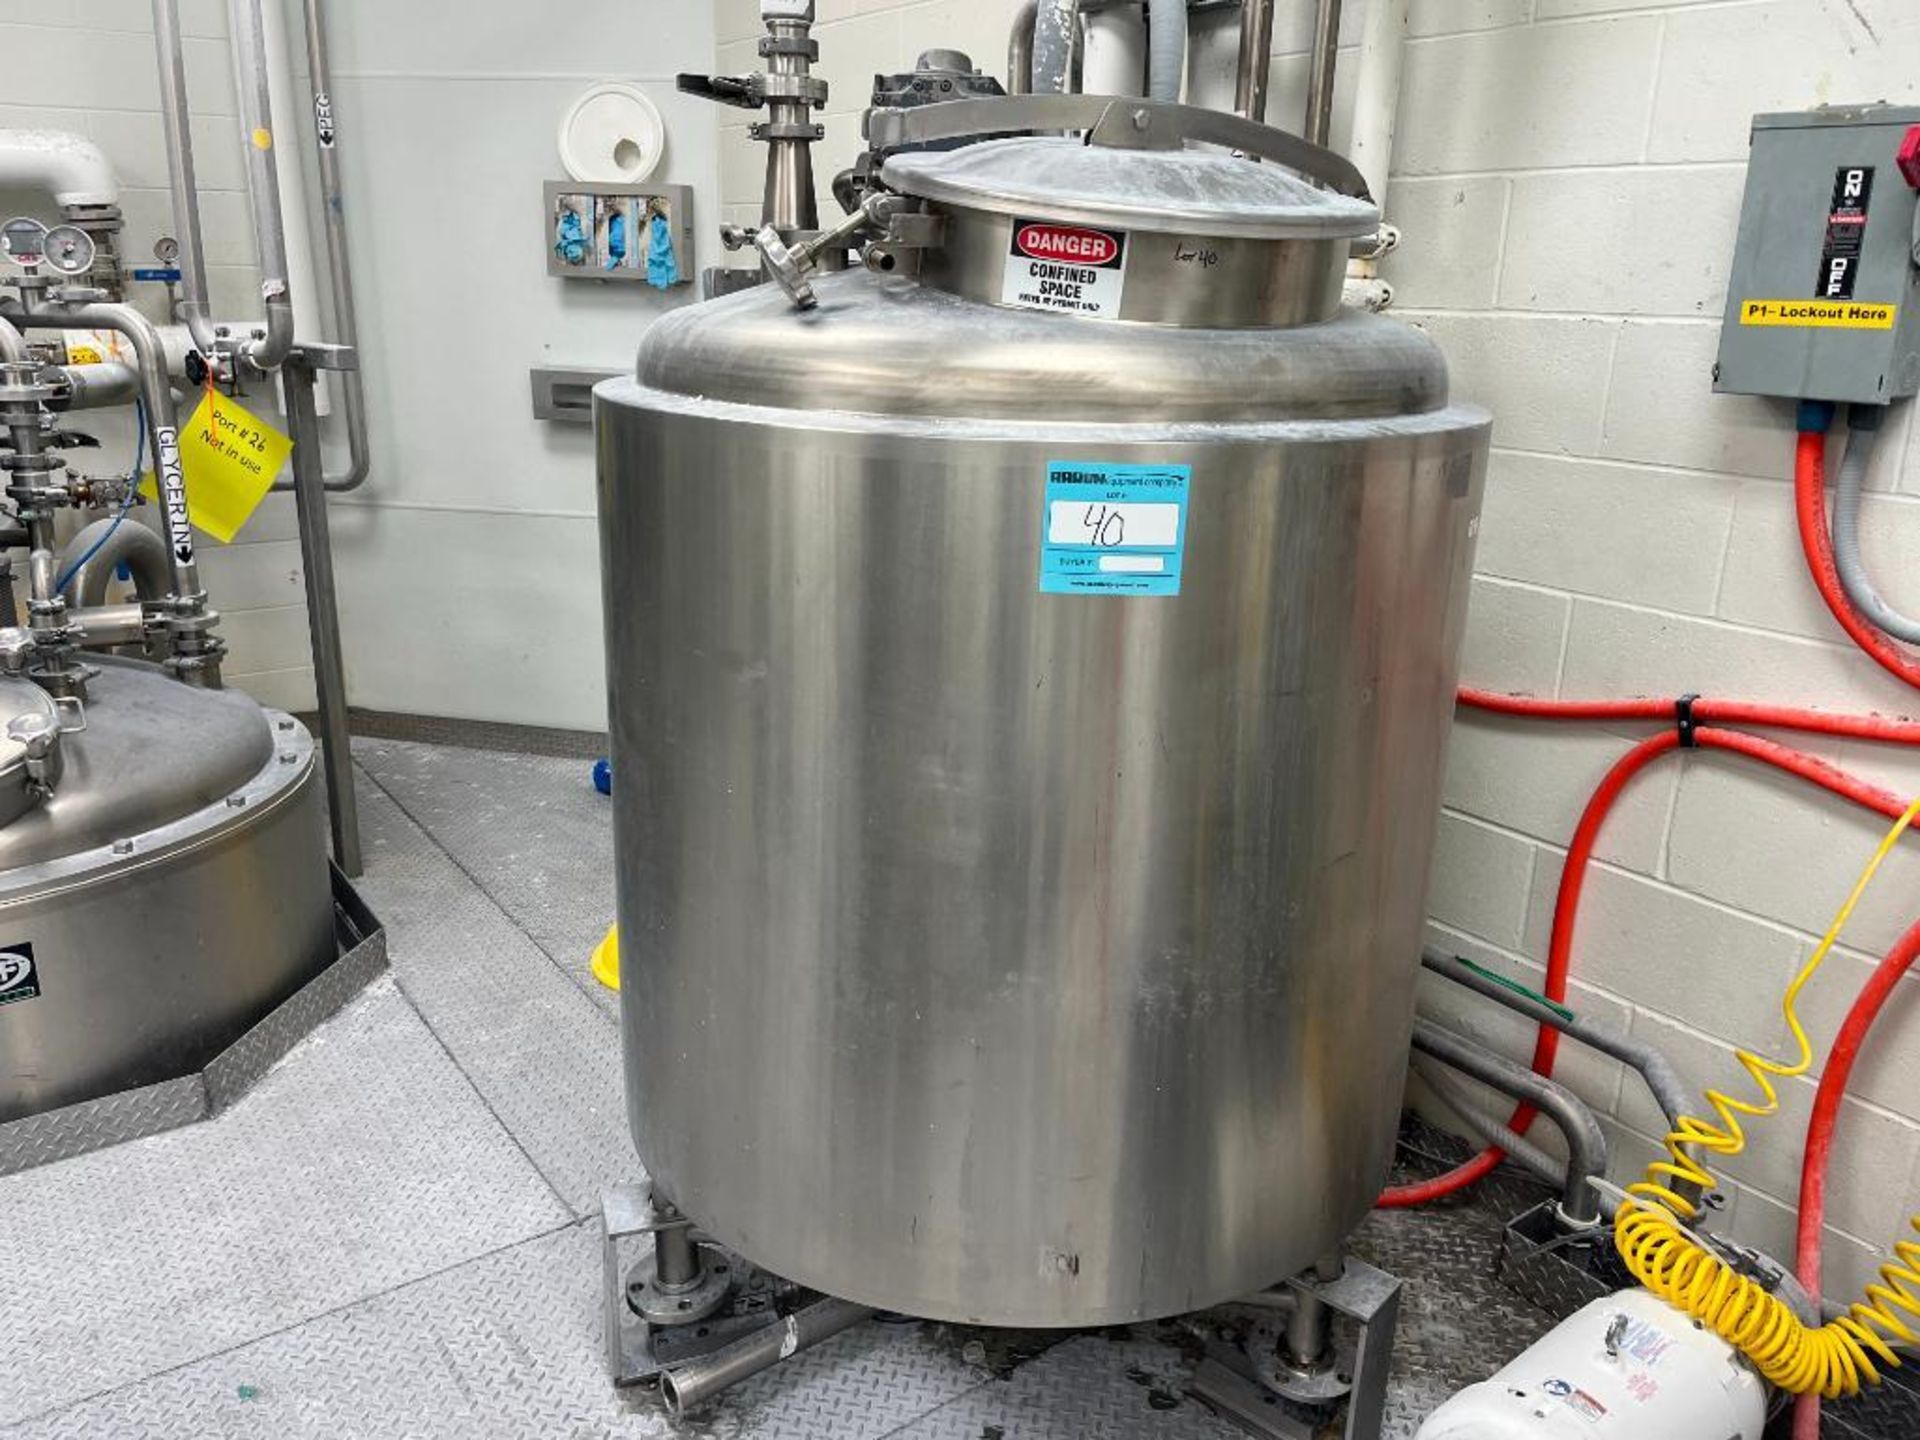 Stainless Steel Tank Aproximate 200 Gallon with Dish Top Cone Bottom. Includes Top Agitator and Cont